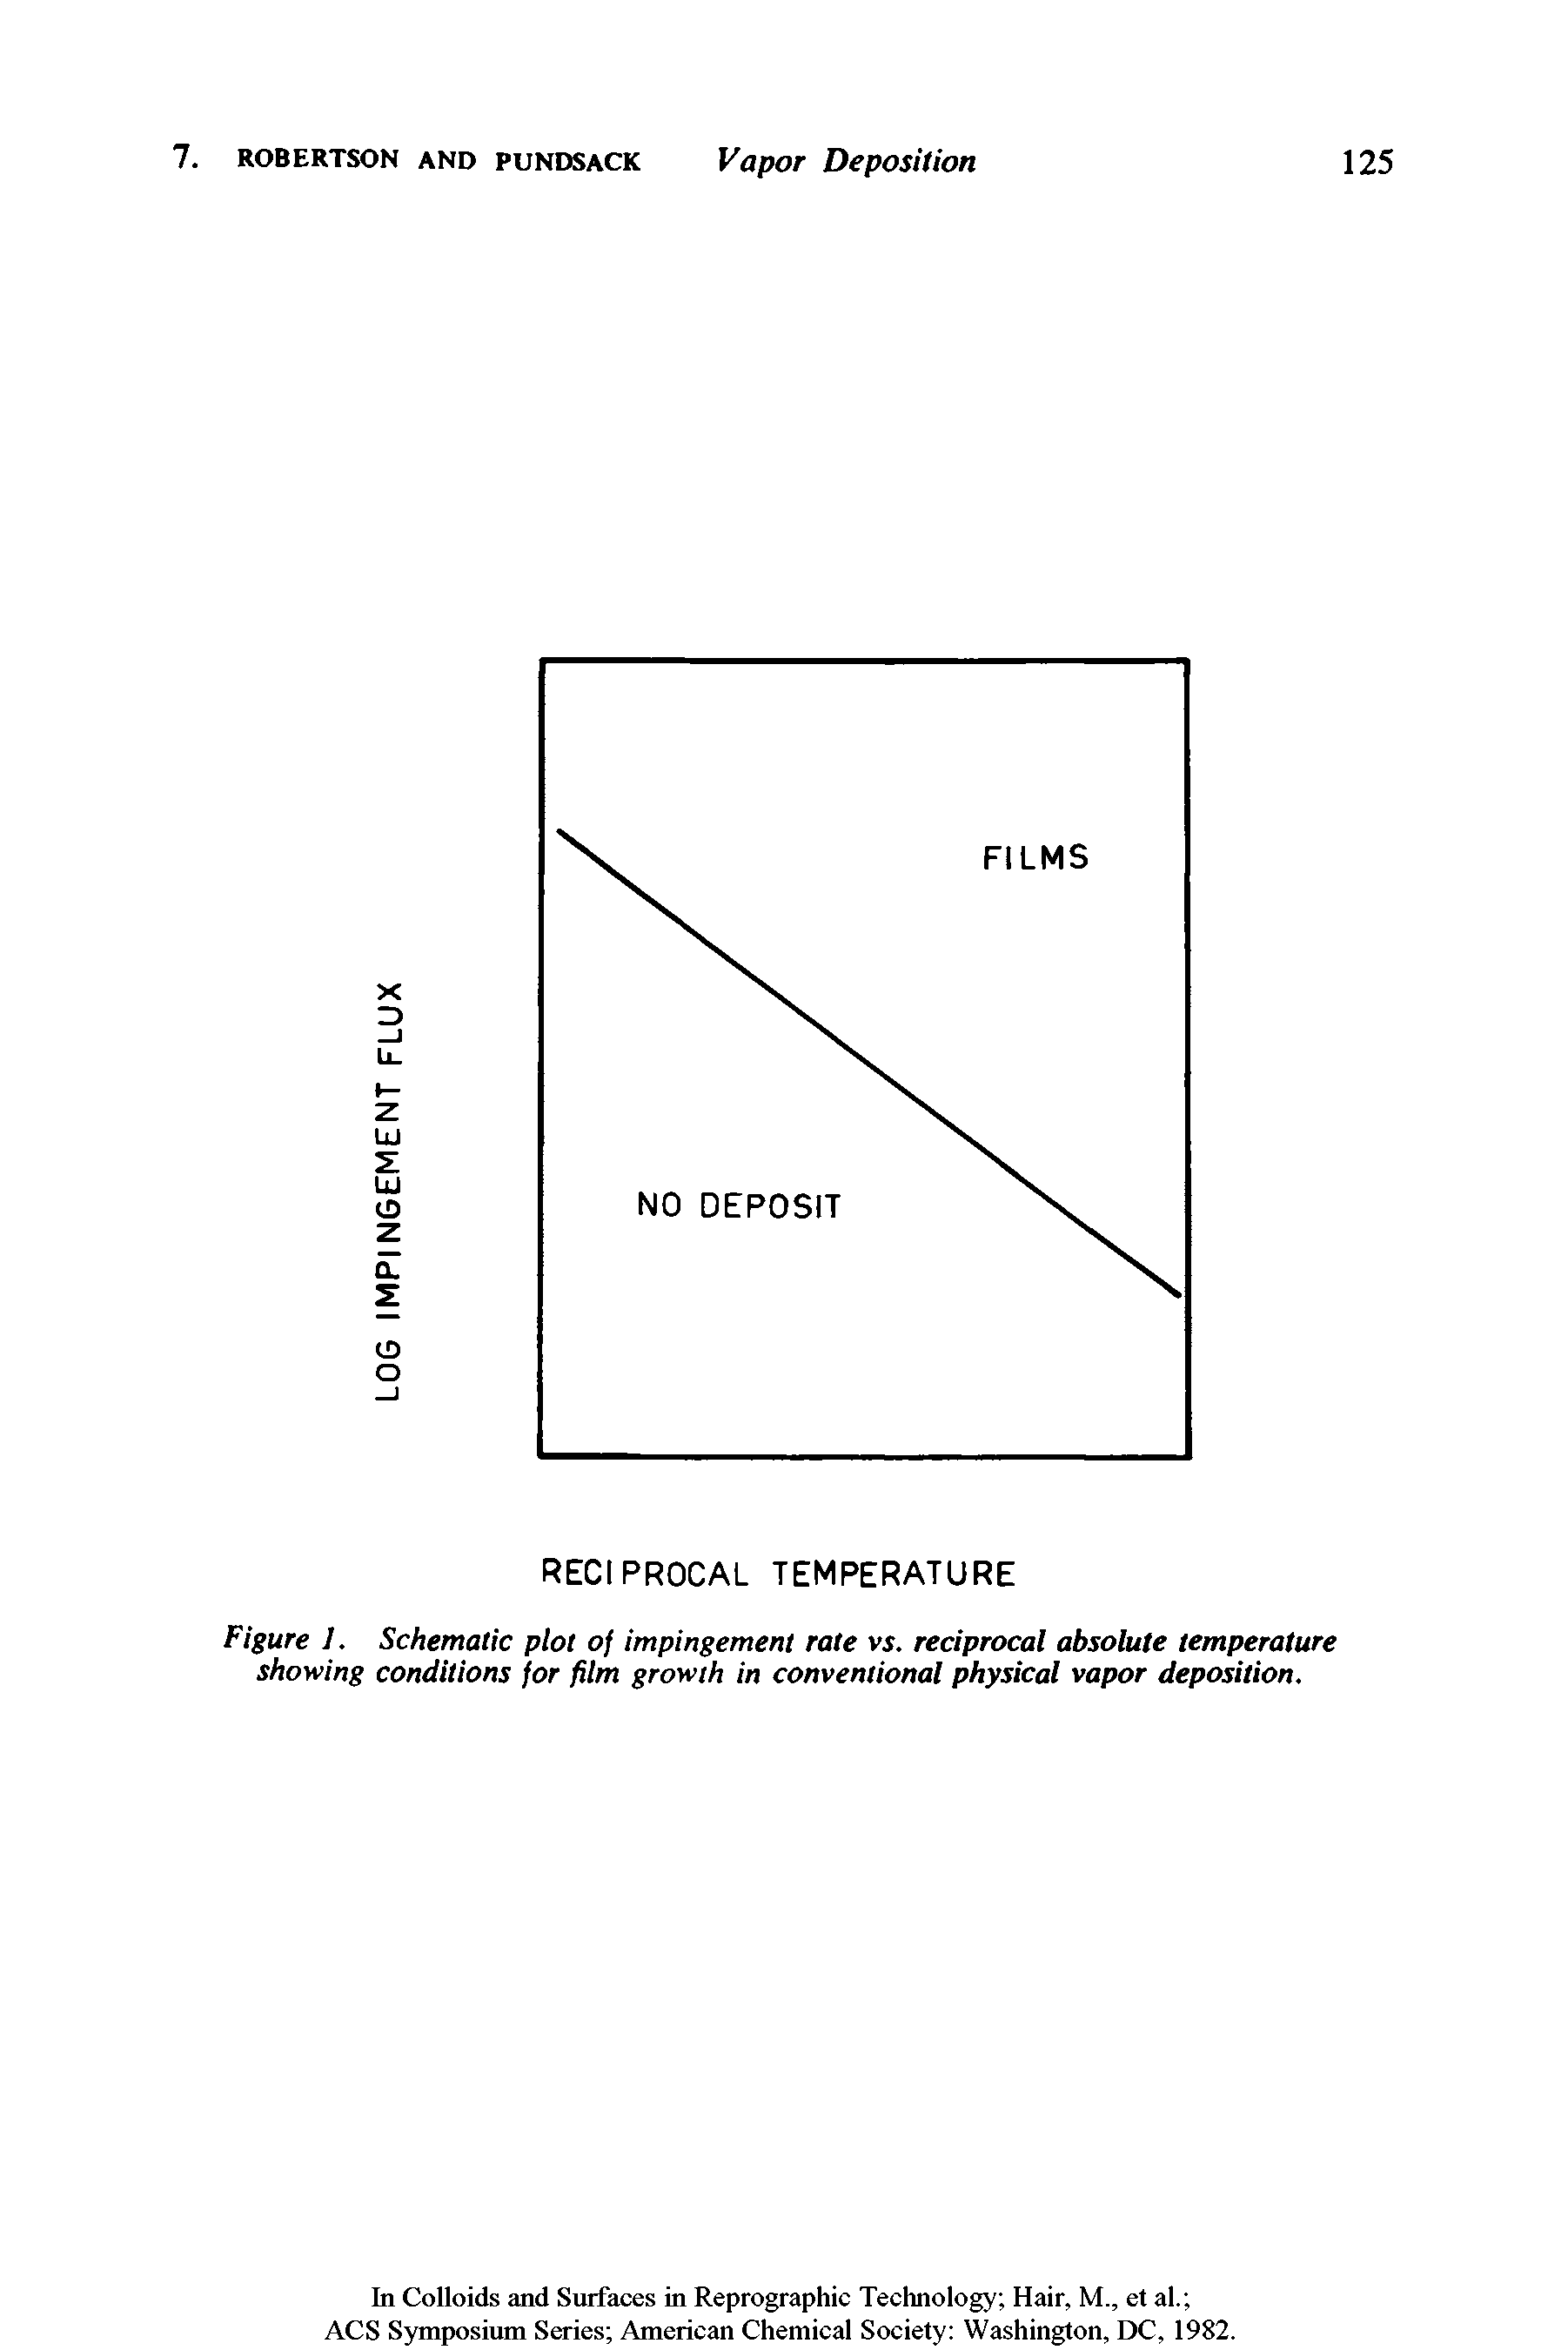 Figure 1. Schematic plot of impingement rate vs. reciprocal absolute temperature showing conditions for film growth in conventional physical vapor deposition.